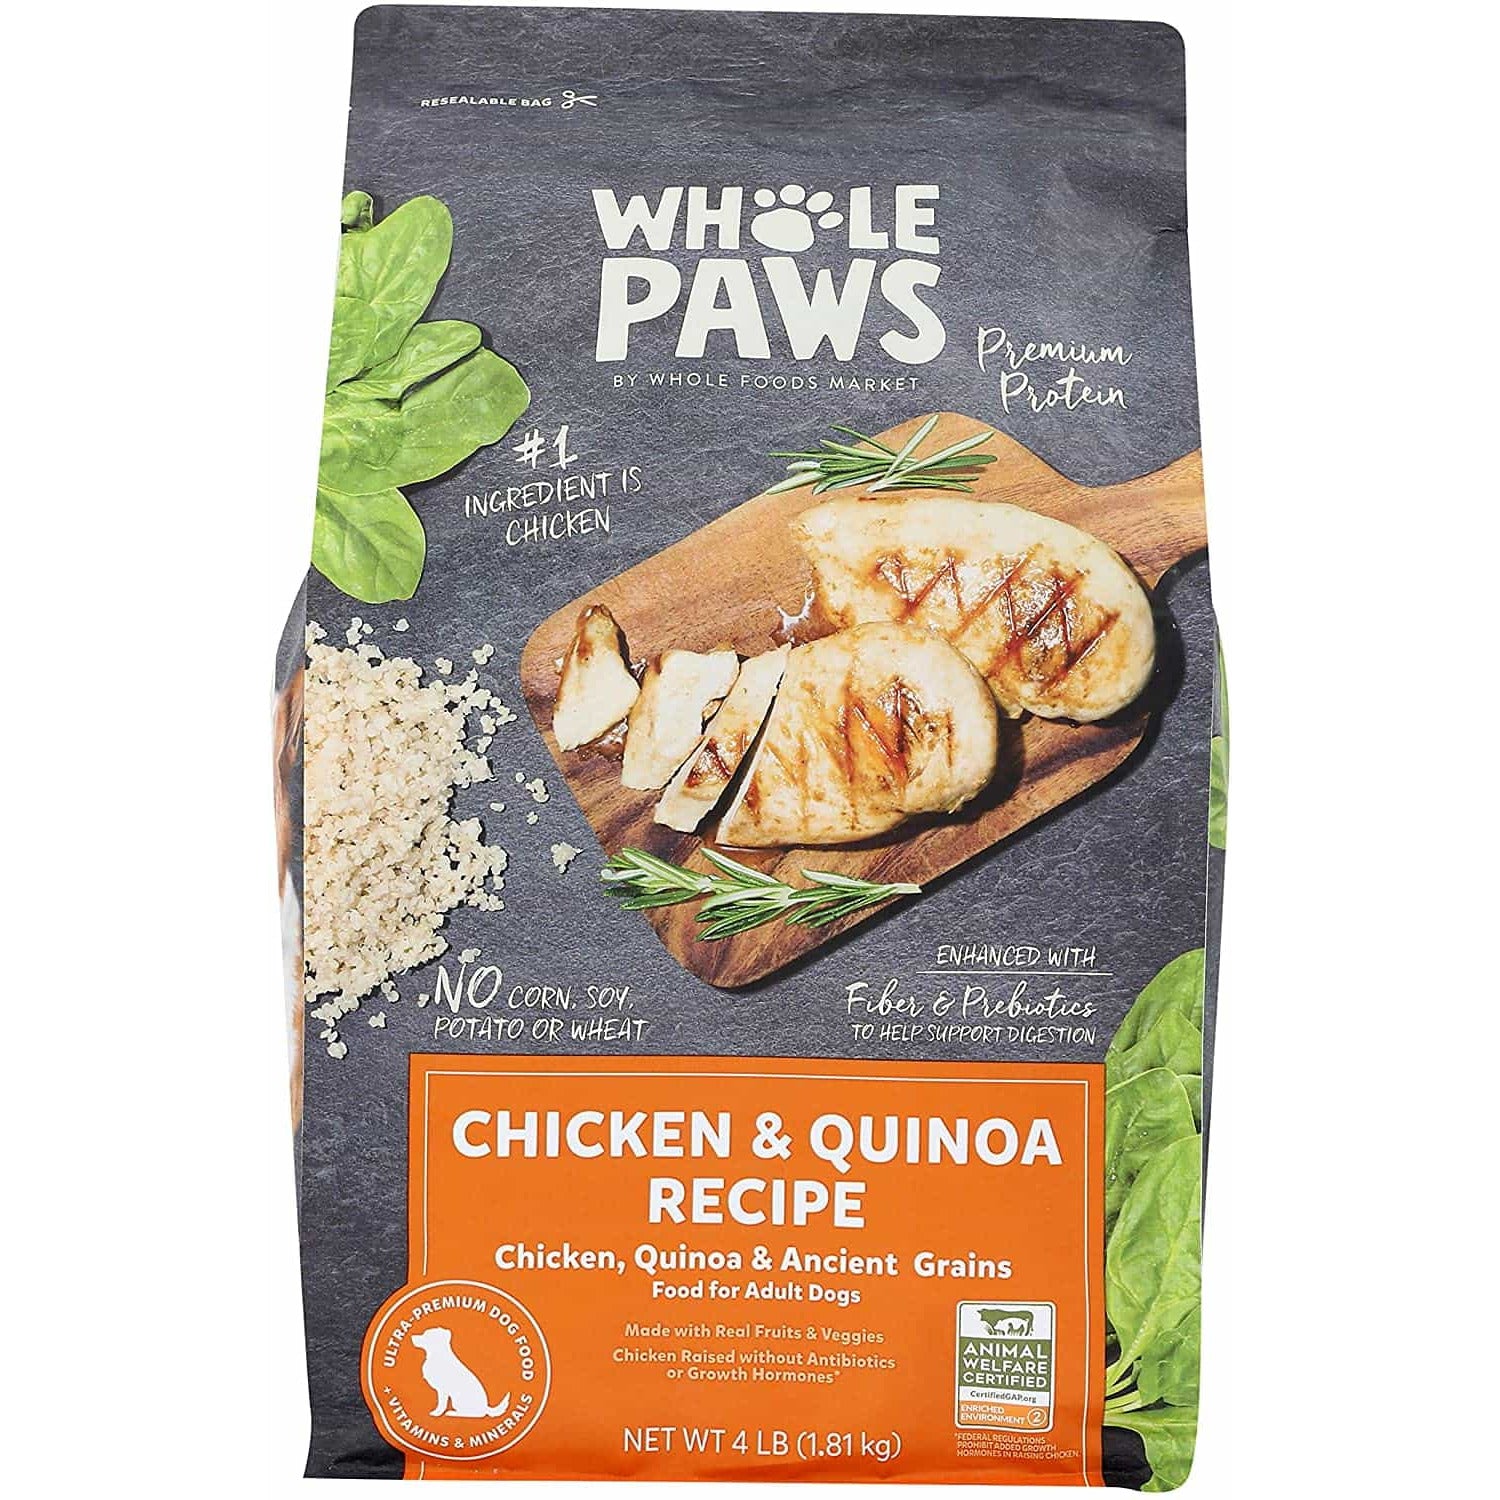 Whole Paws Adult Dog Food, Chicken & Quinoa Recipe, 4 Lb.